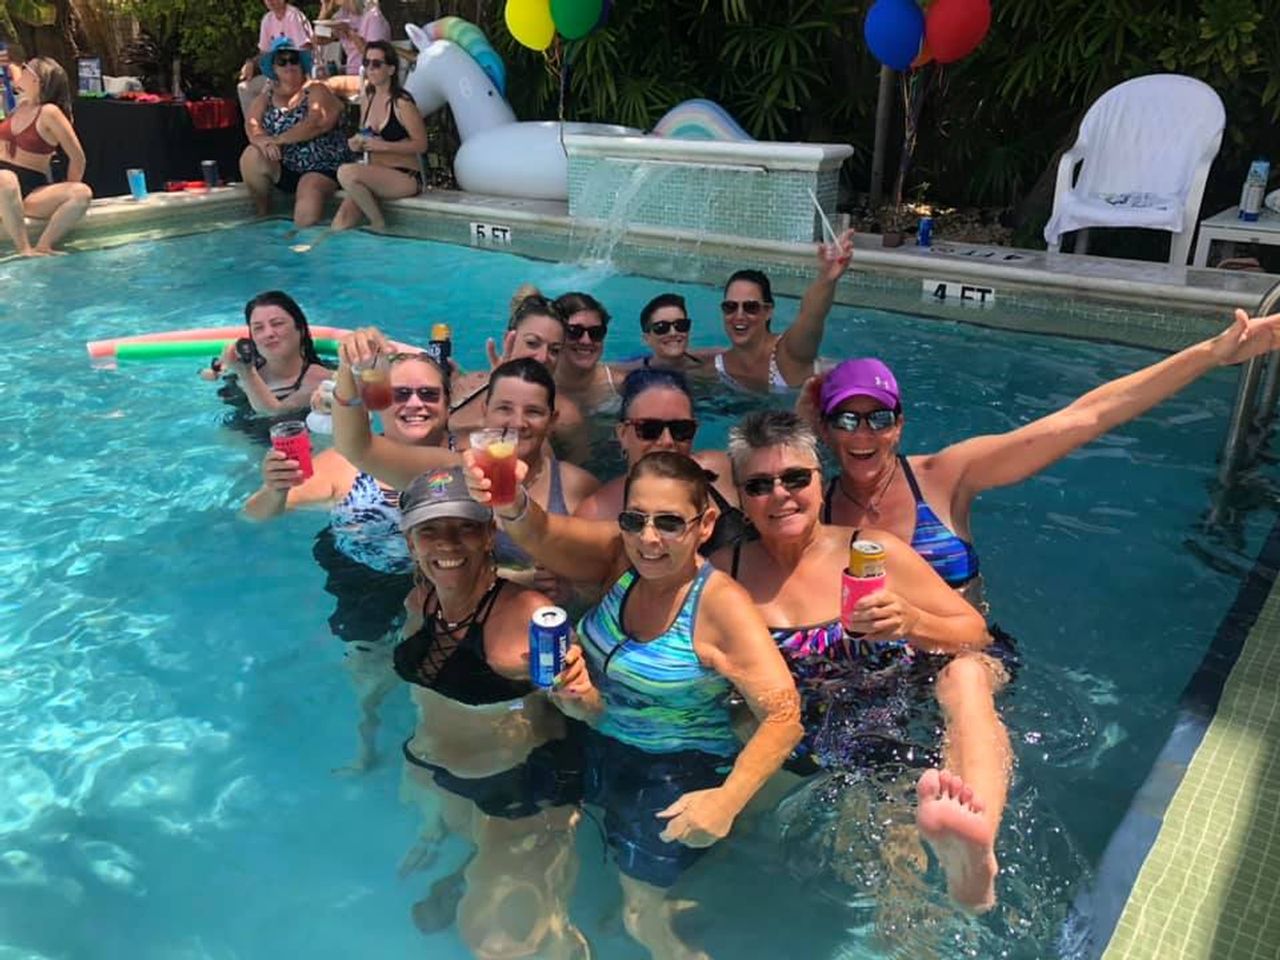 Entertainment and parties with like-minded people and relaxation on an accepting subtropical island  are all facets of the annual Womenfest. 